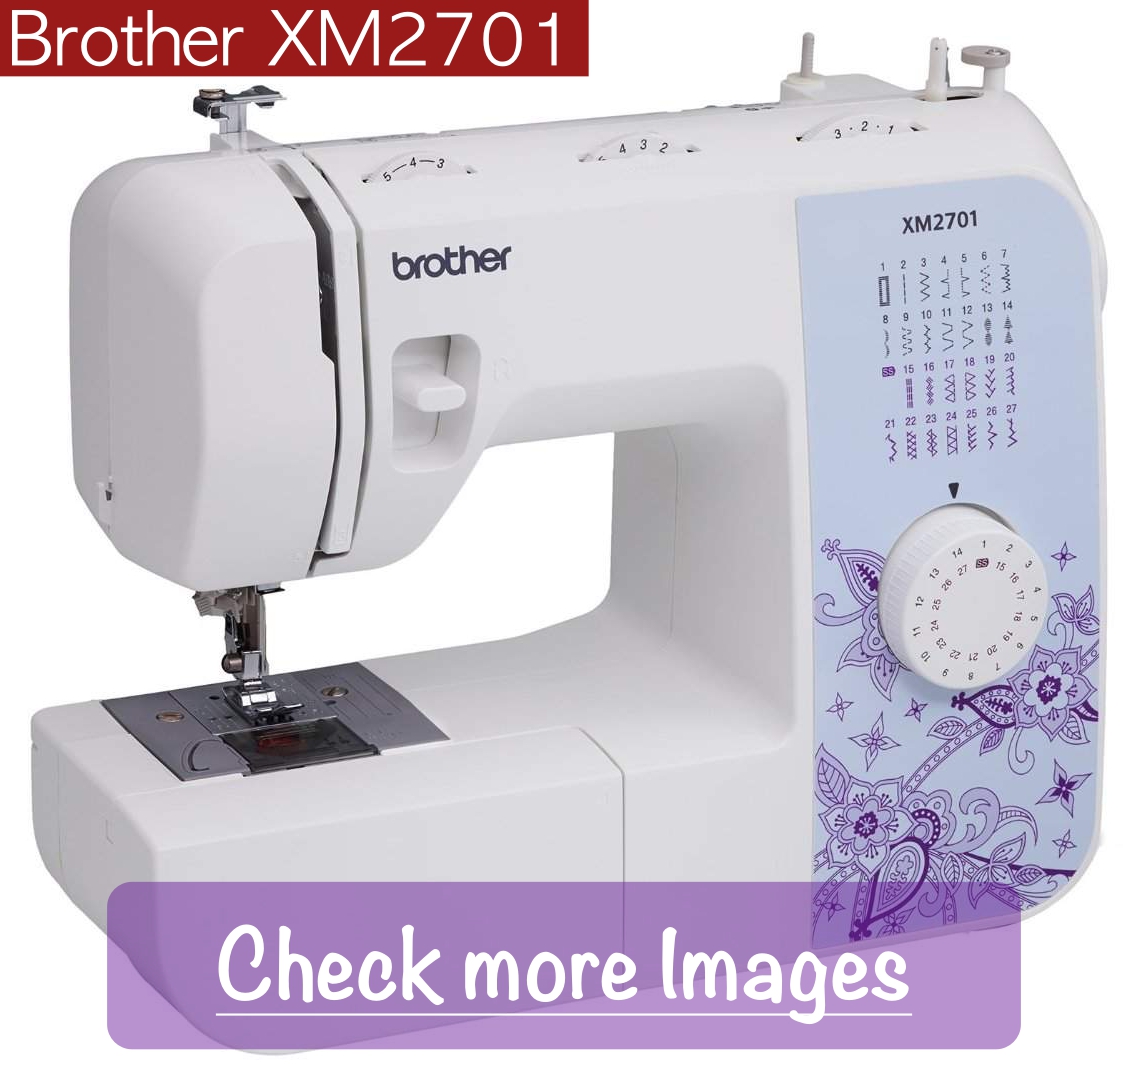 Brother xm2701 Sewing Machine Review